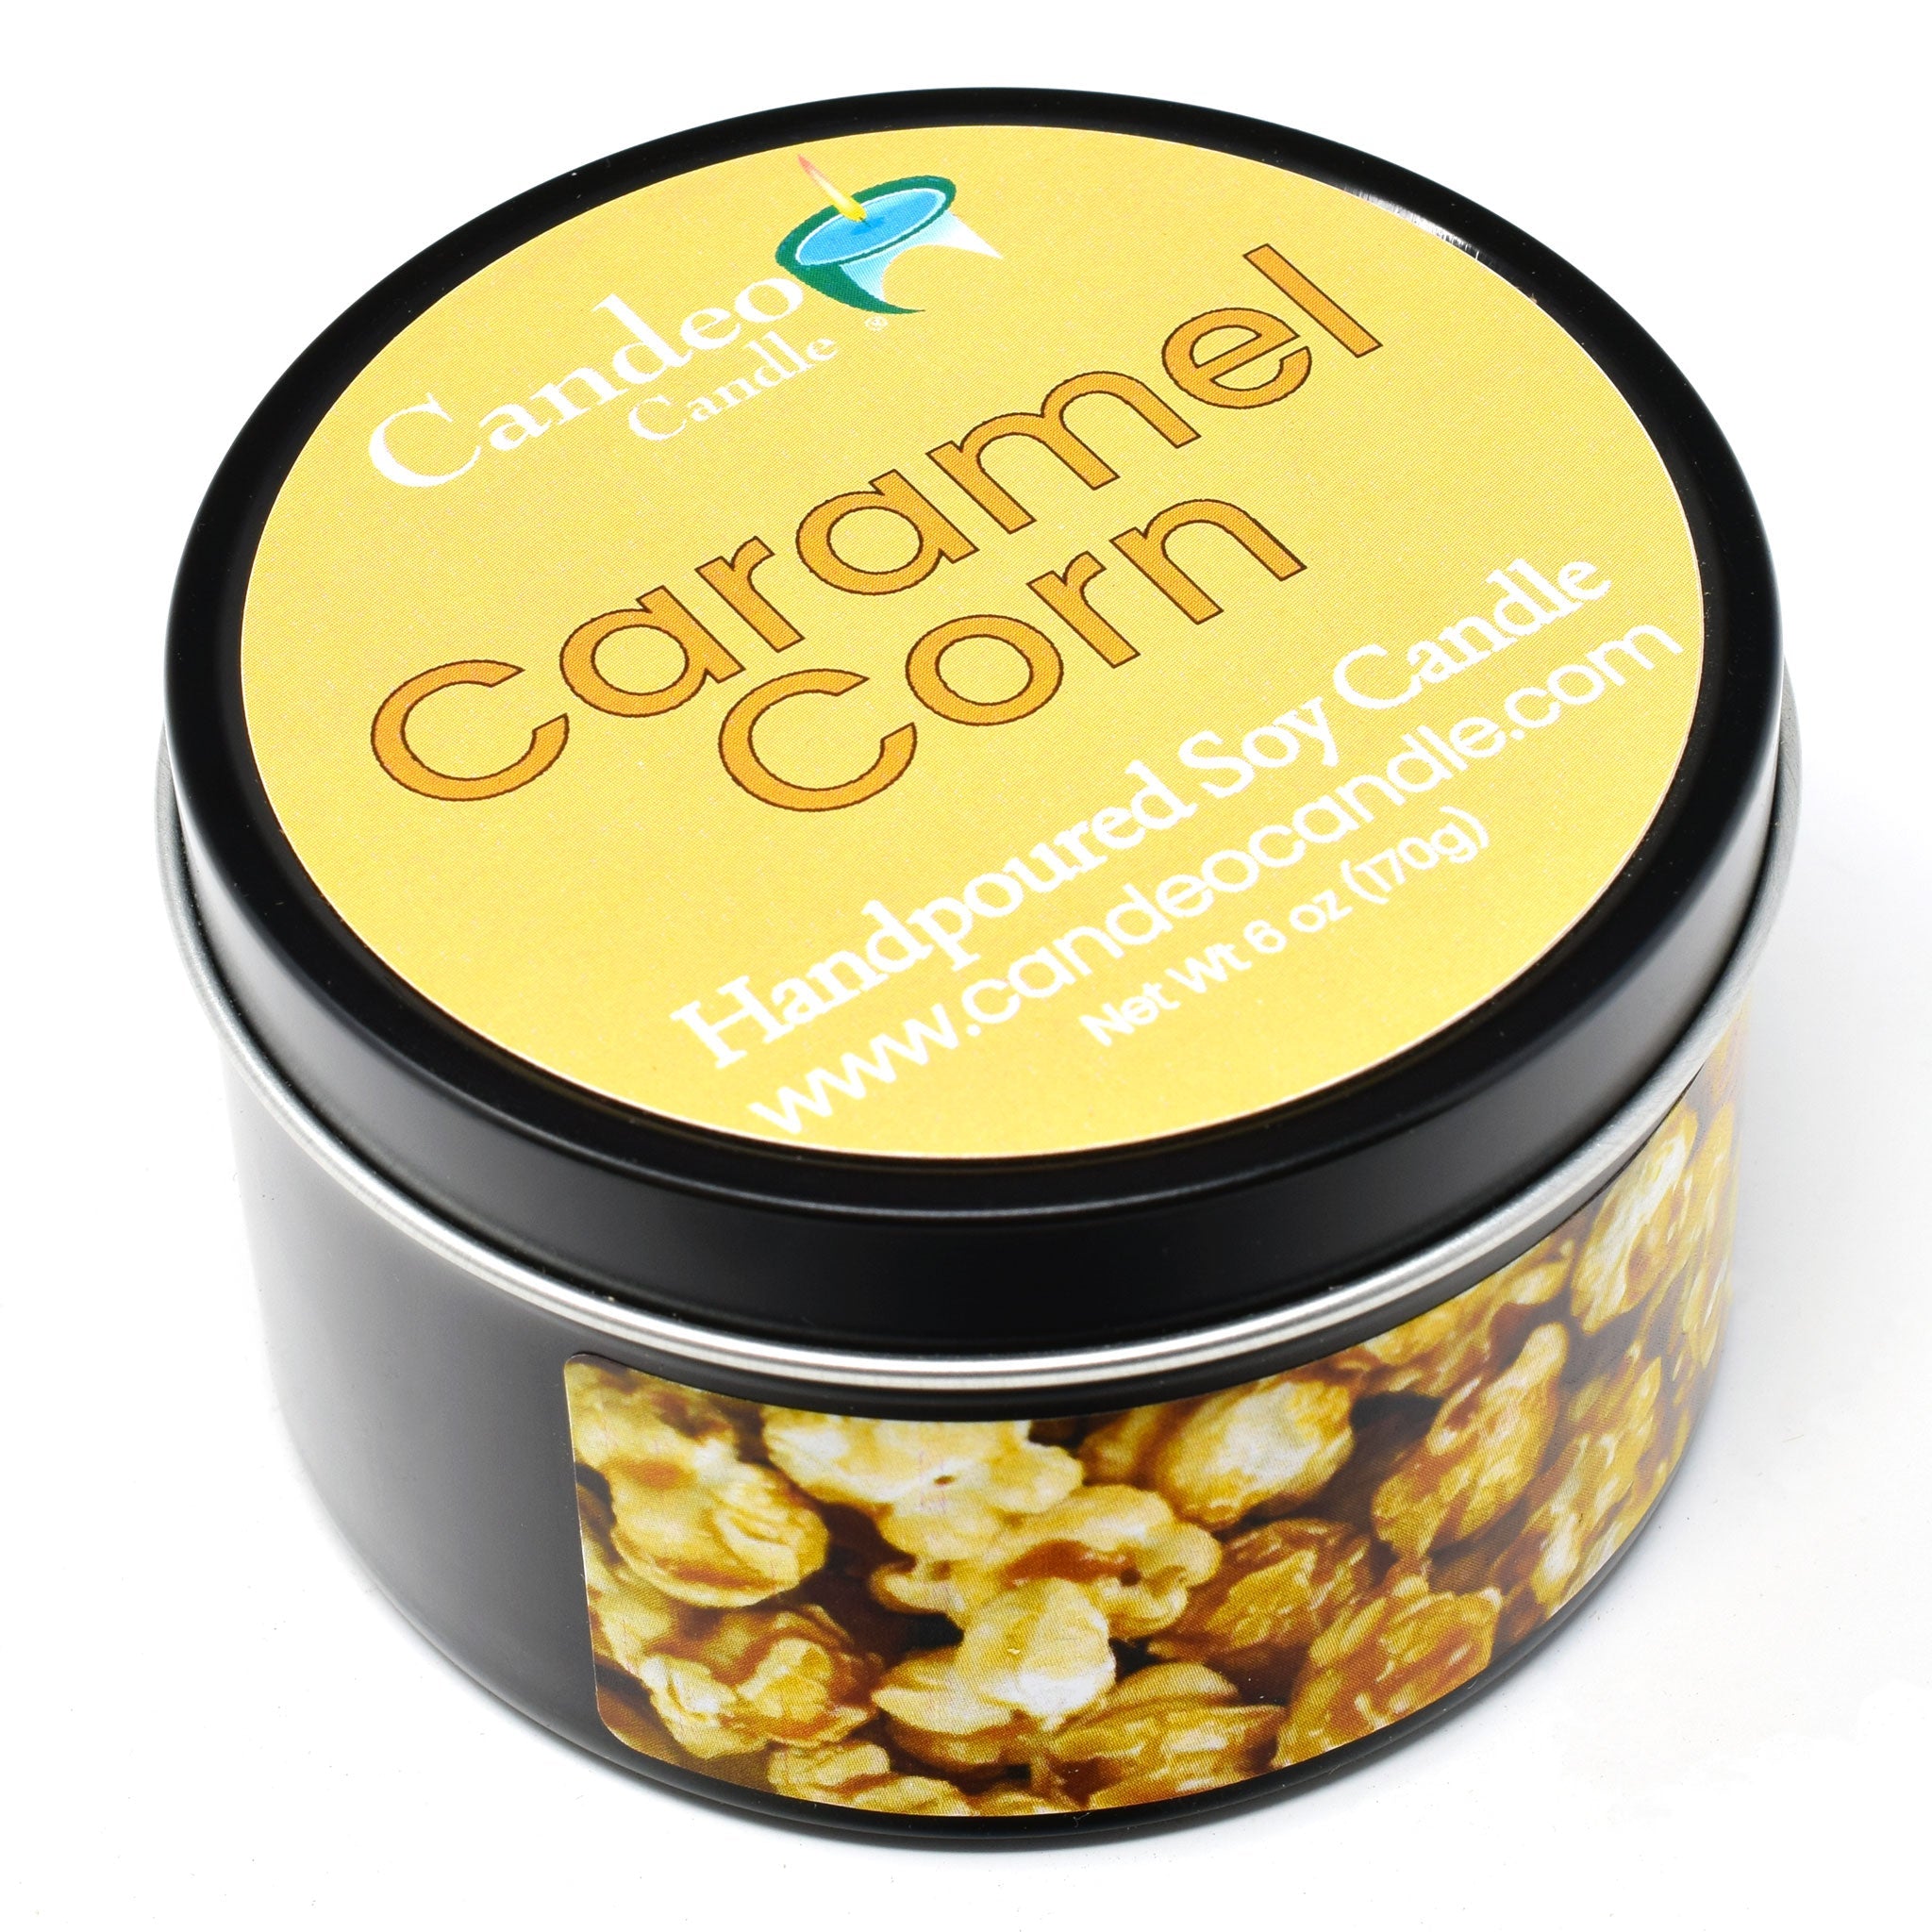 Caramel Corn, 6oz Soy Candle Tin - Candeo Candle